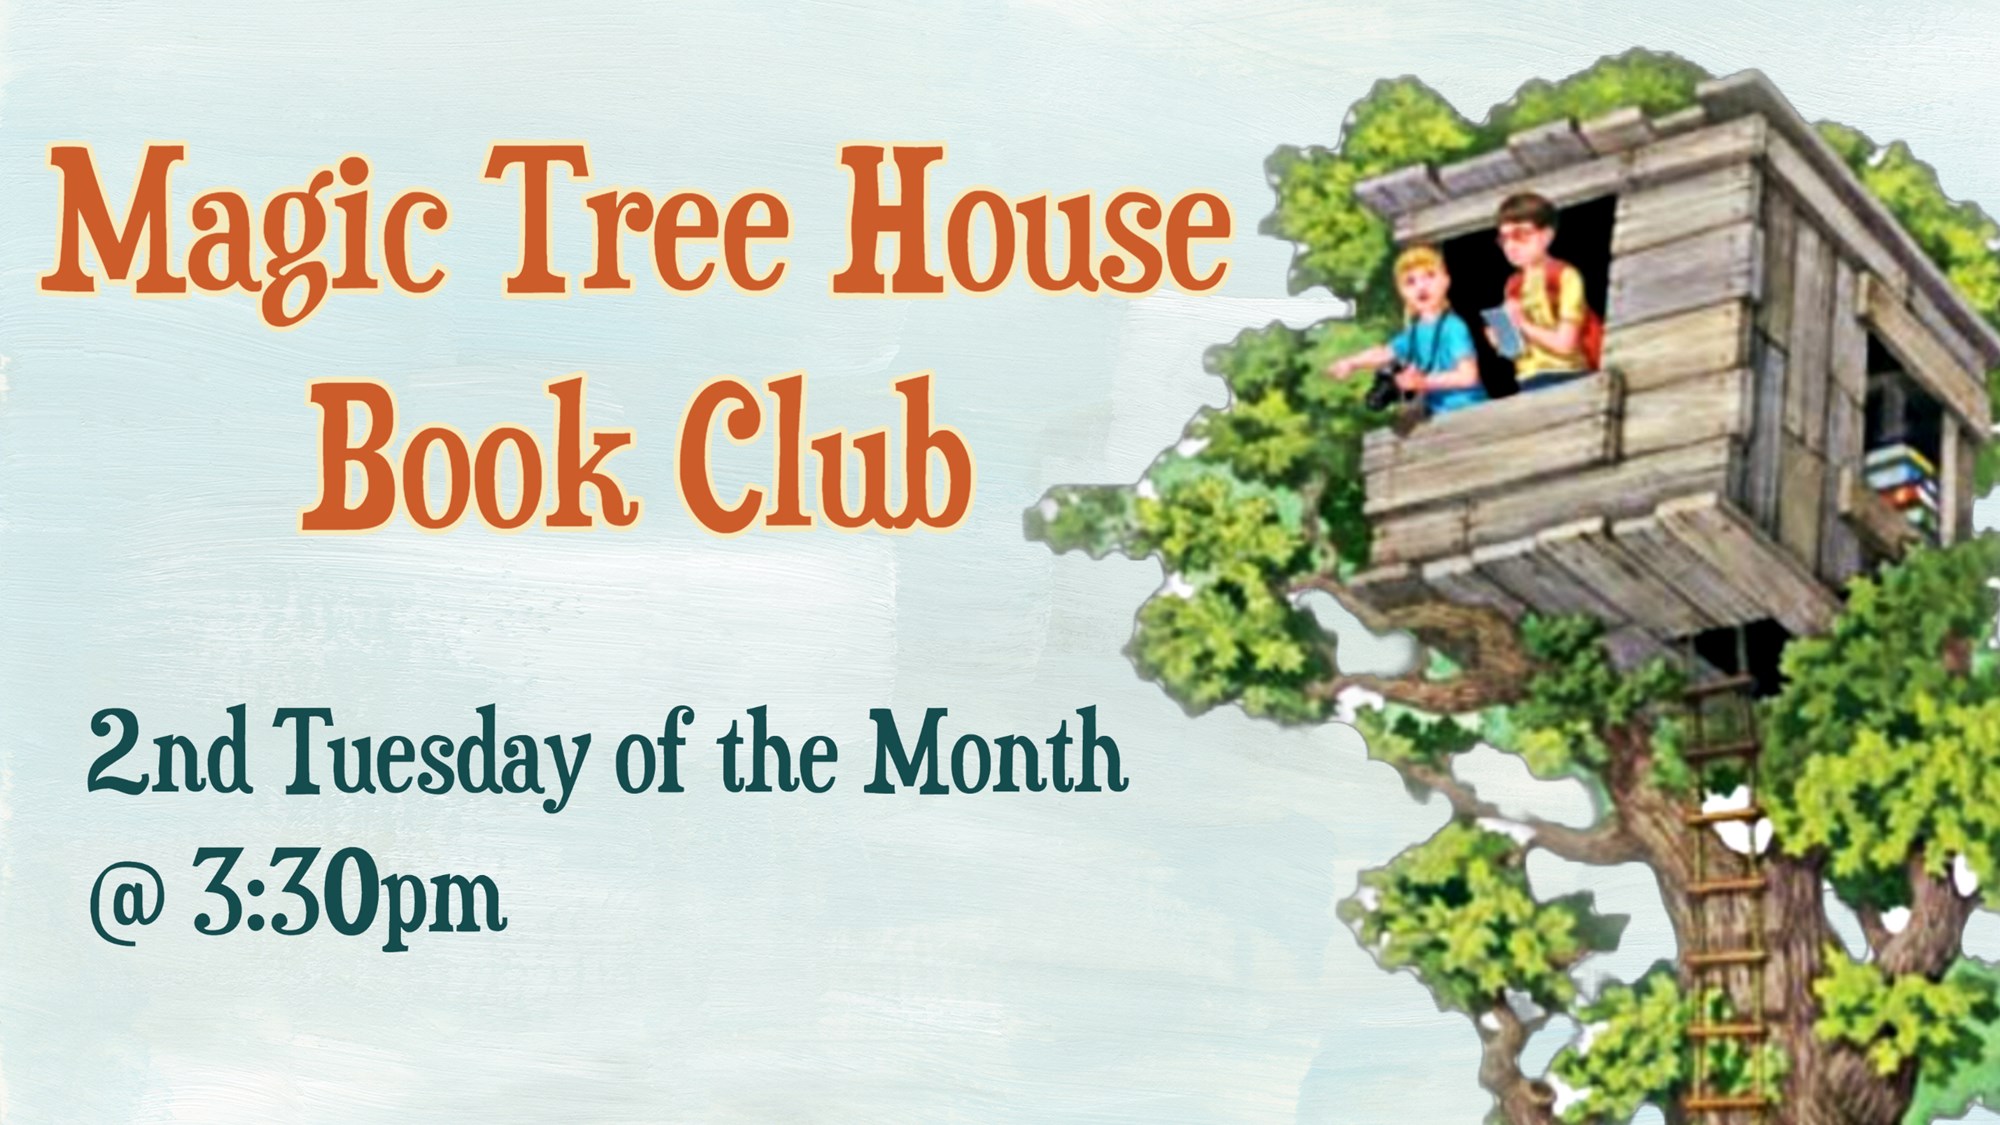 Magic Tree House Book Club 2nd Tuesday of the Month @ 3:30 PM